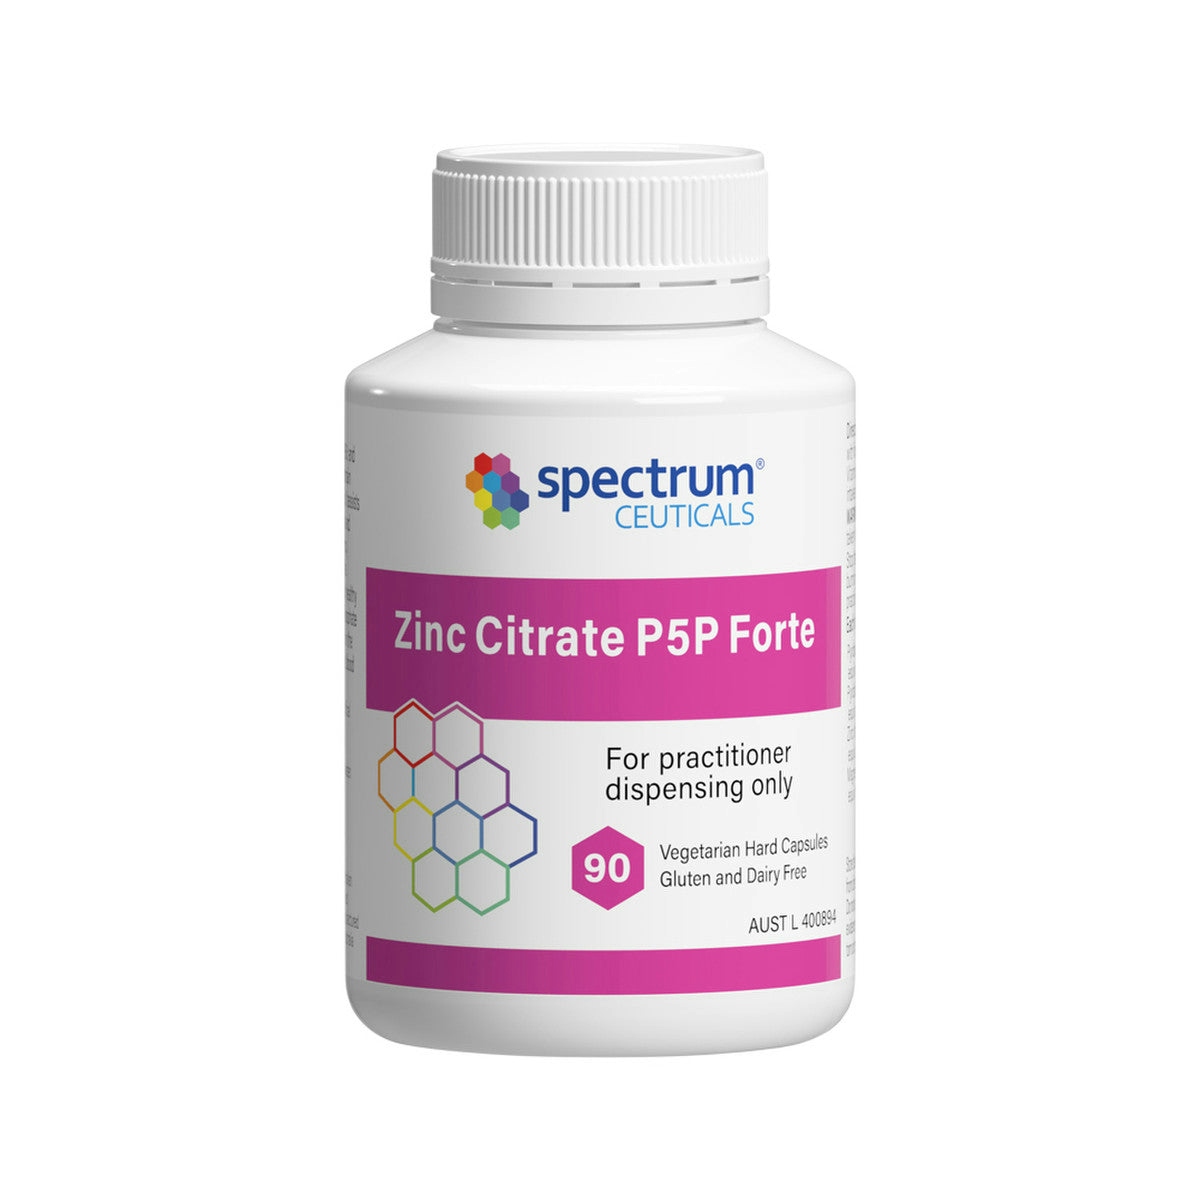 image of Spectrumceuticals Zinc Citrate P5P Forte 90c on white background